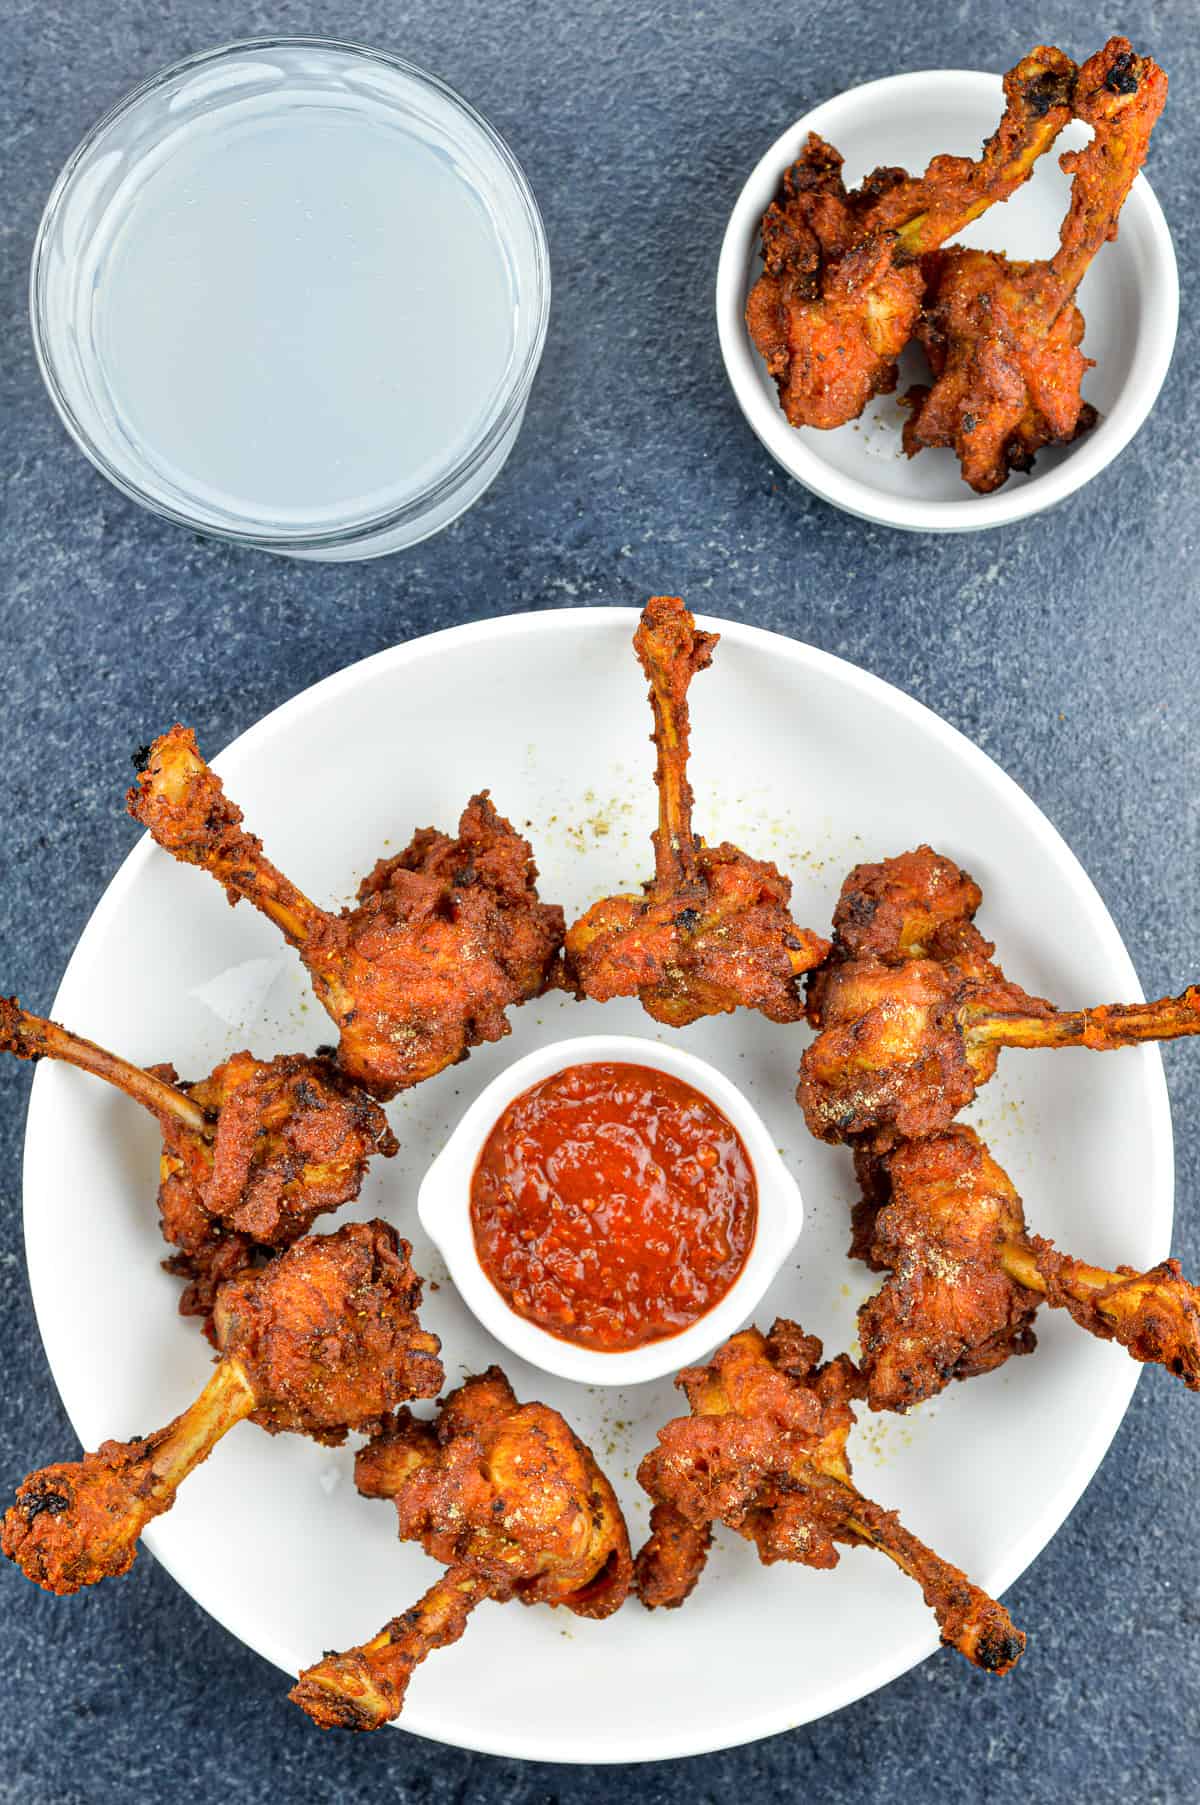 chicken lollipops placed around a small bowl of schezwan chutney in a white plate, served along with a drink, and a few extra lollipops on the side